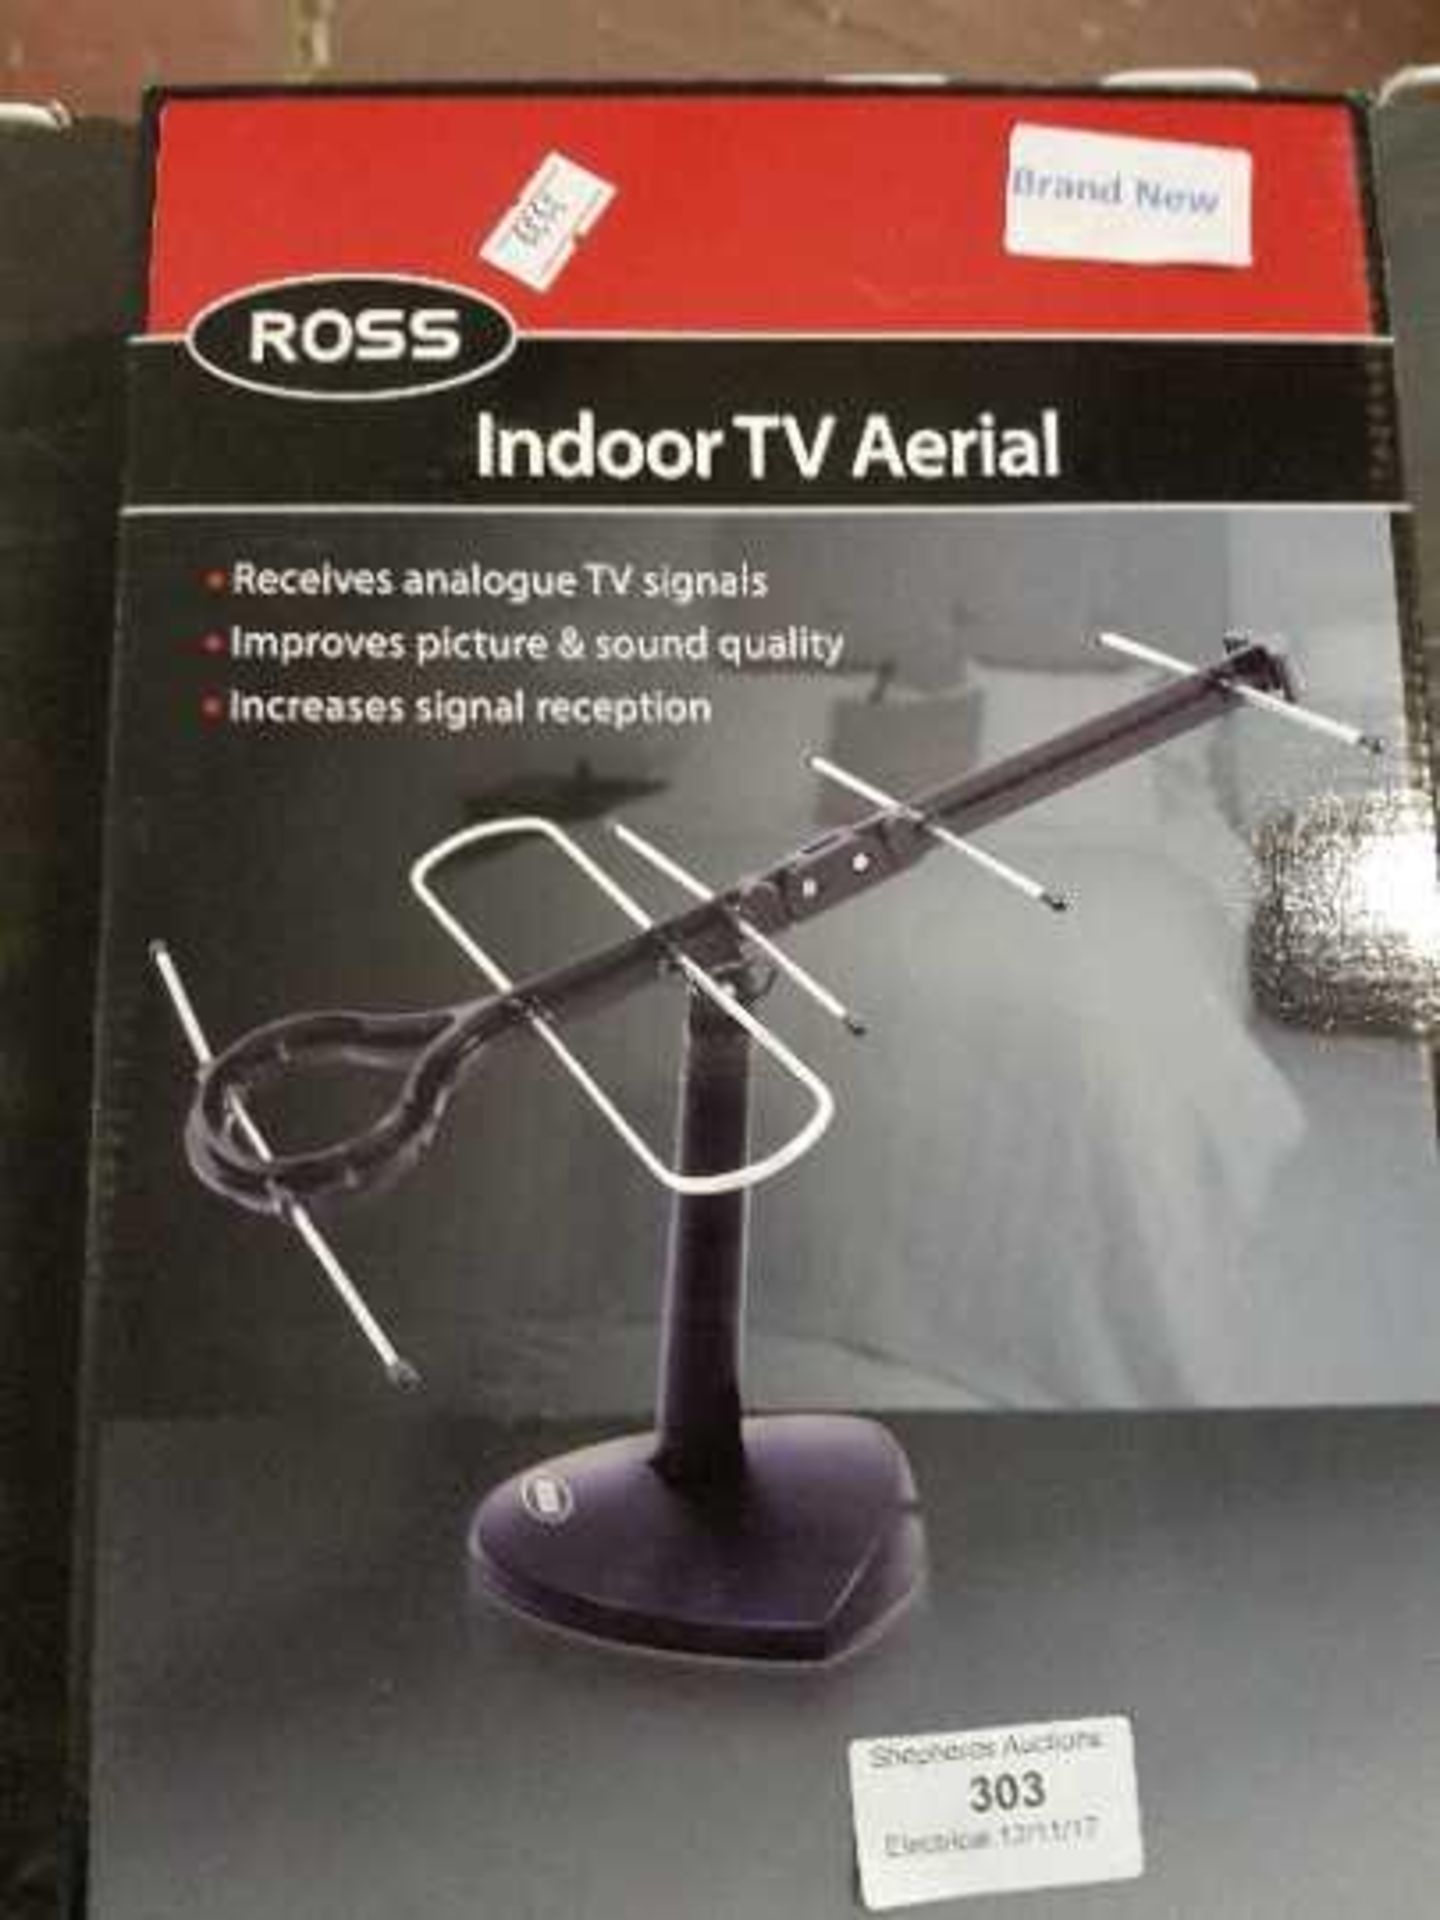 Ross indoor TV aerial, new and boxed